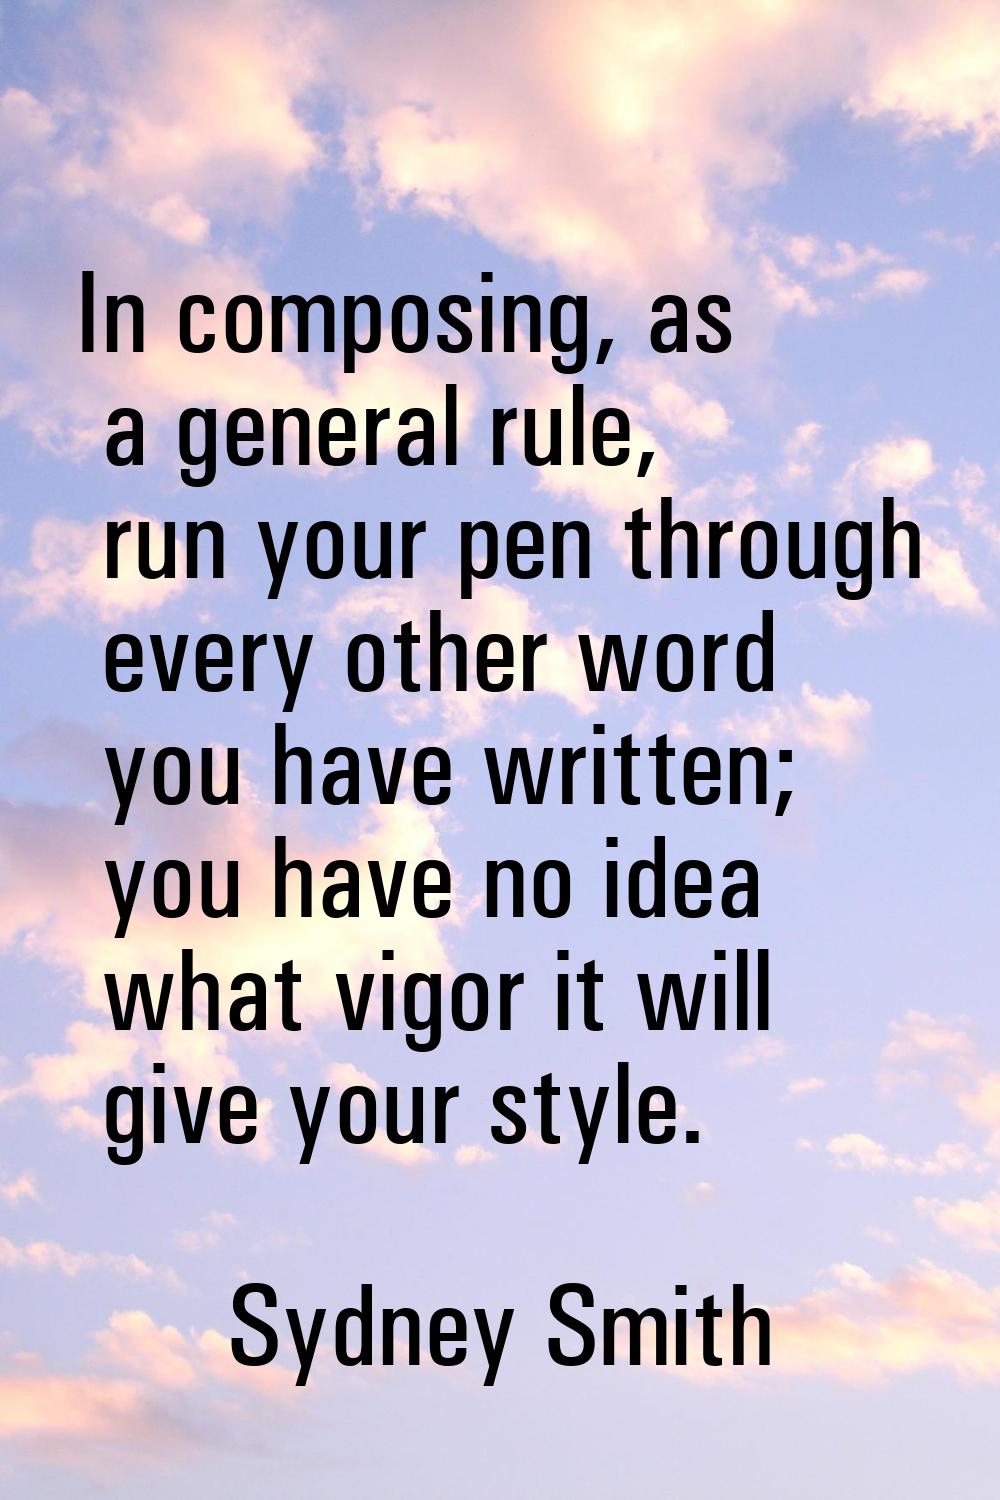 In composing, as a general rule, run your pen through every other word you have written; you have n